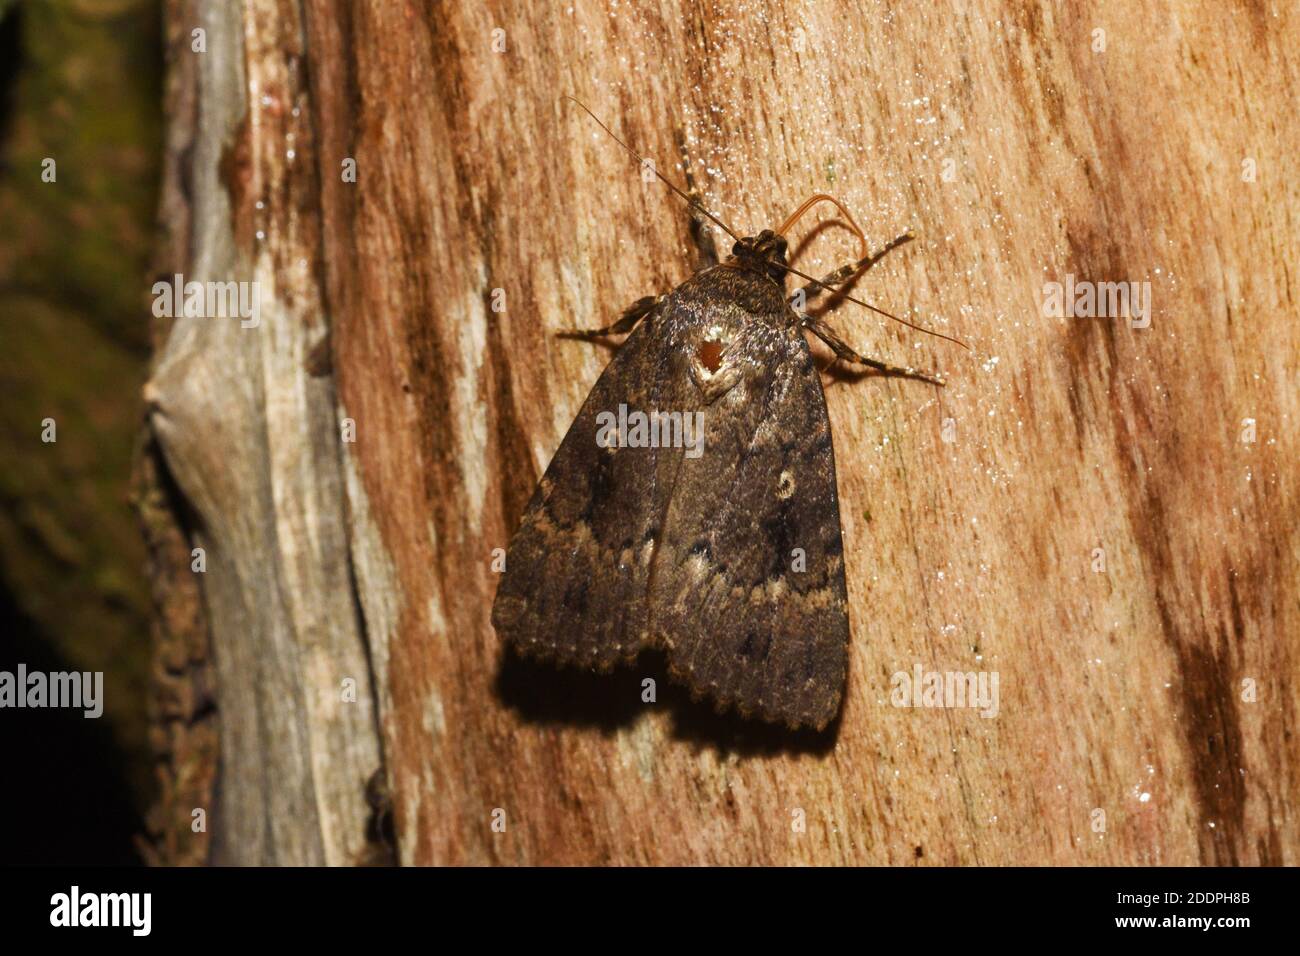 Copper Underwing, Humped Green Fruitworm, Pyramidal Green Fruitworm (Amphipyra pyramidea, Noctua pyramidea), at the bait, dorsal view, Germany, North Stock Photo